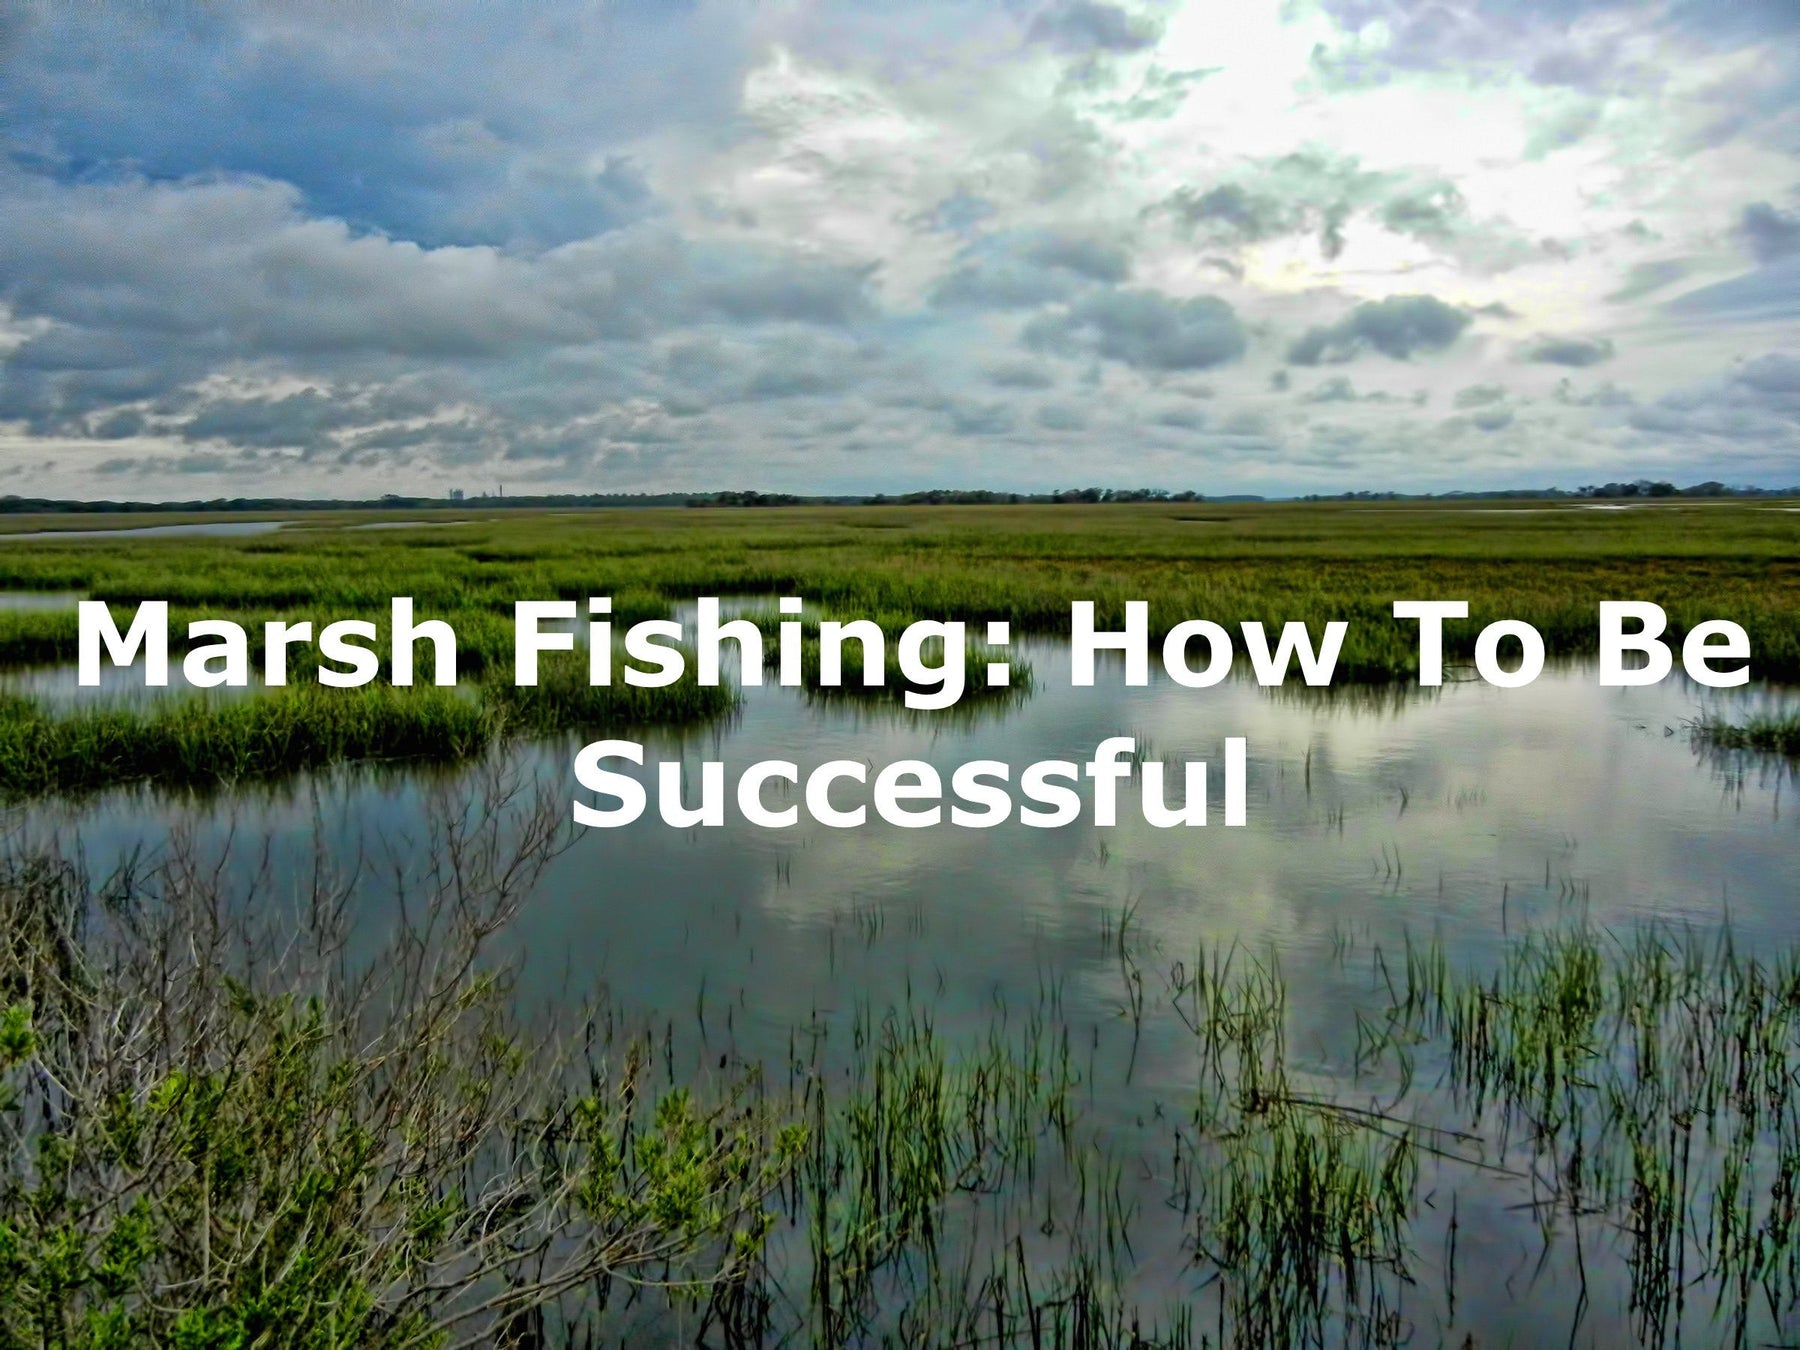 Marsh Fishing: How to be successful